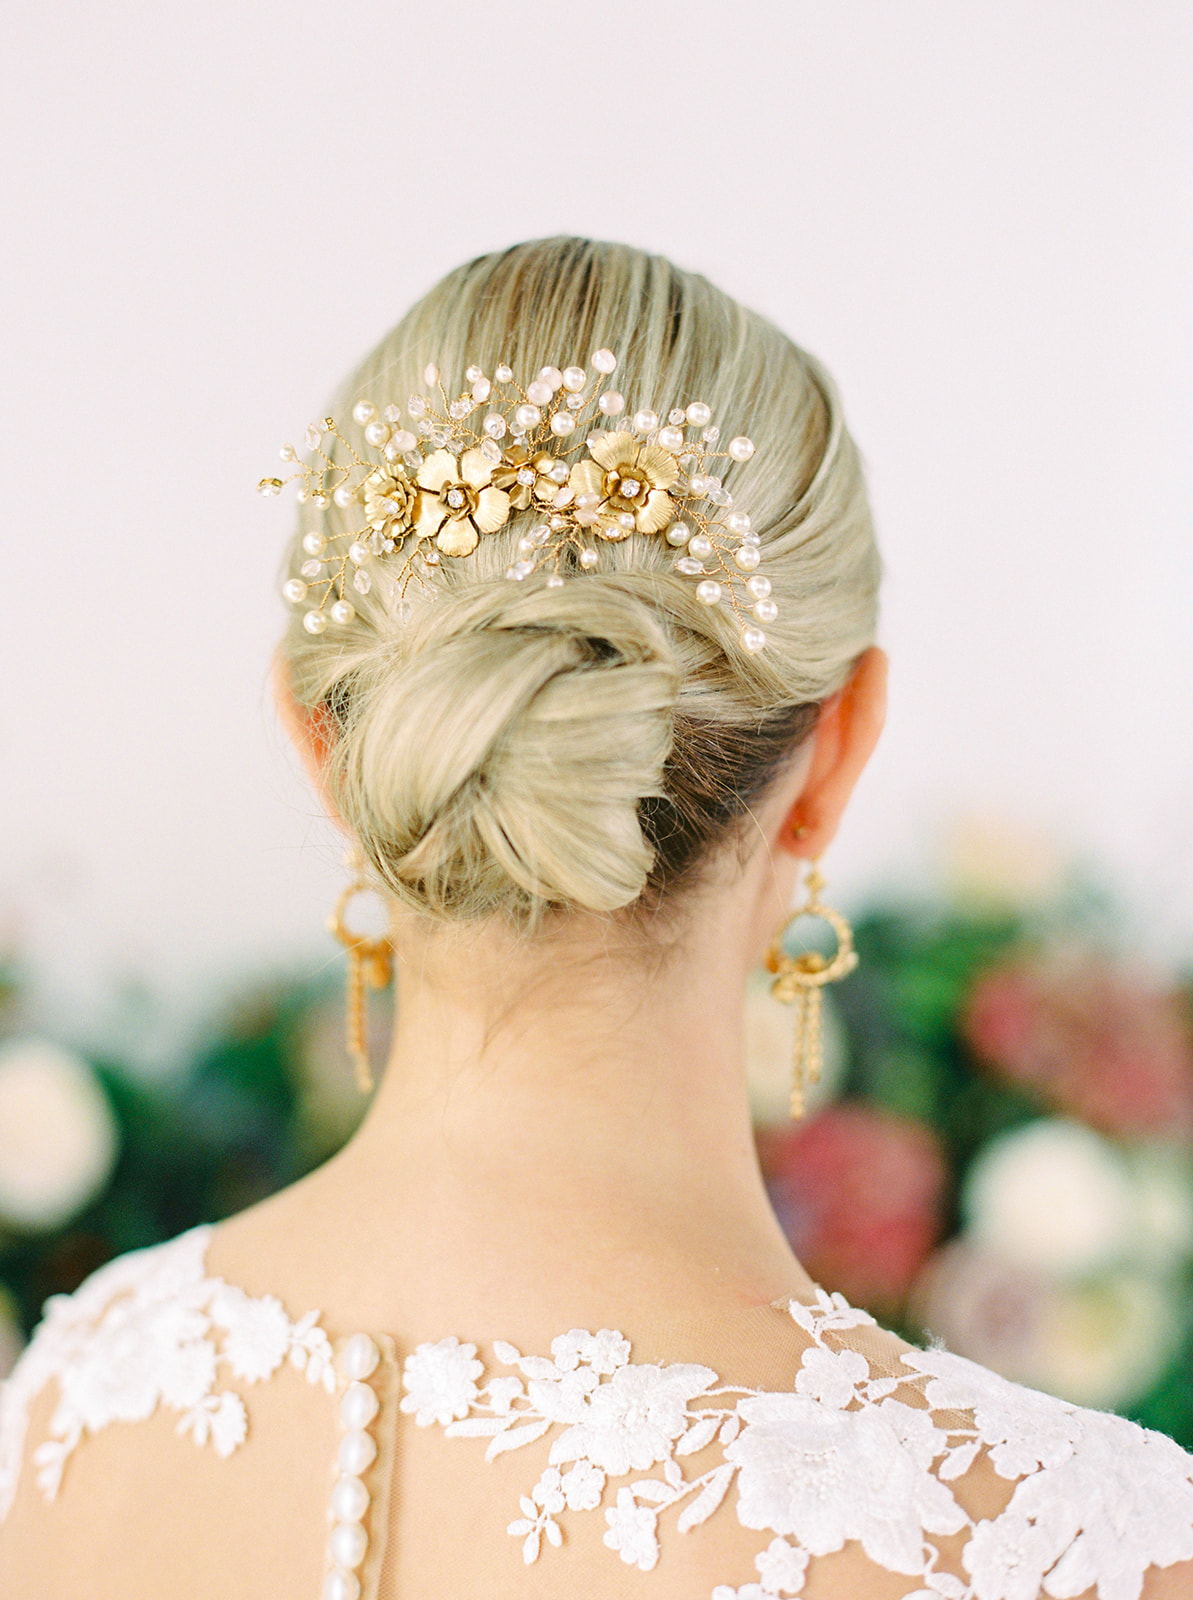 Bridal accessory trends for 2022